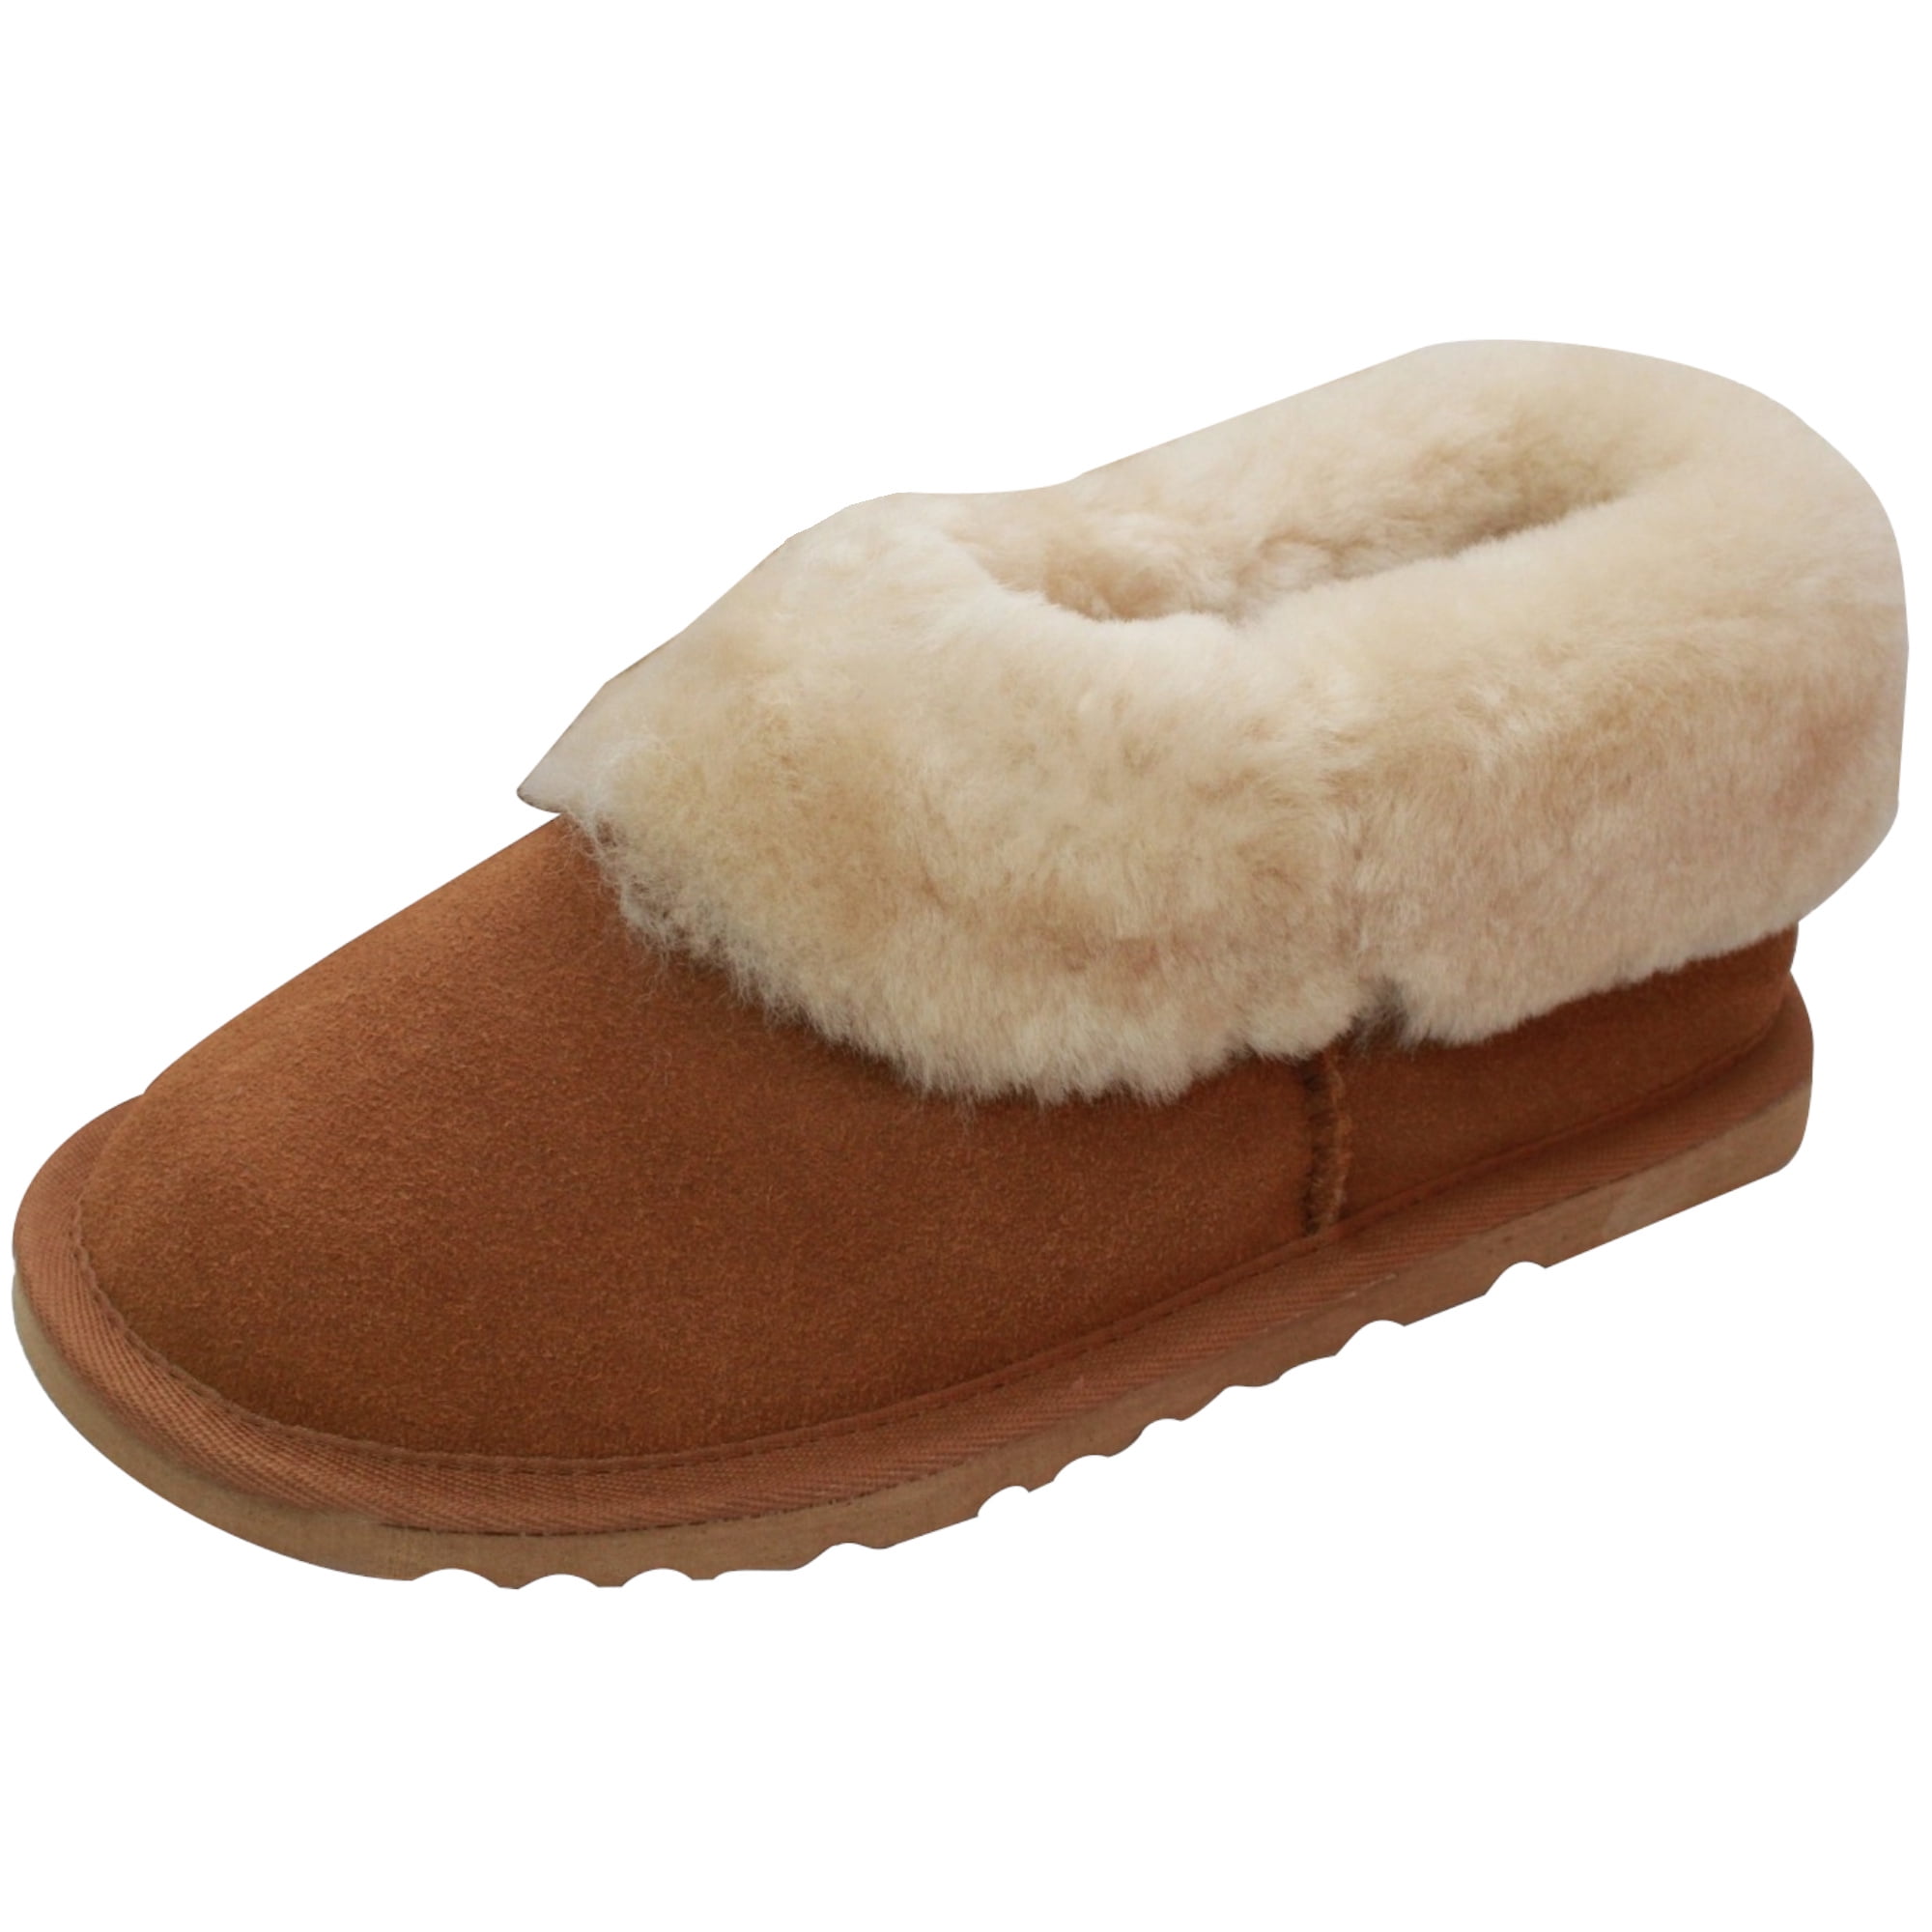 SHEEPSKIN  SLIPPERS/BOOTS FOR BABY 100% GENUINE  LEATHER UNISEX 